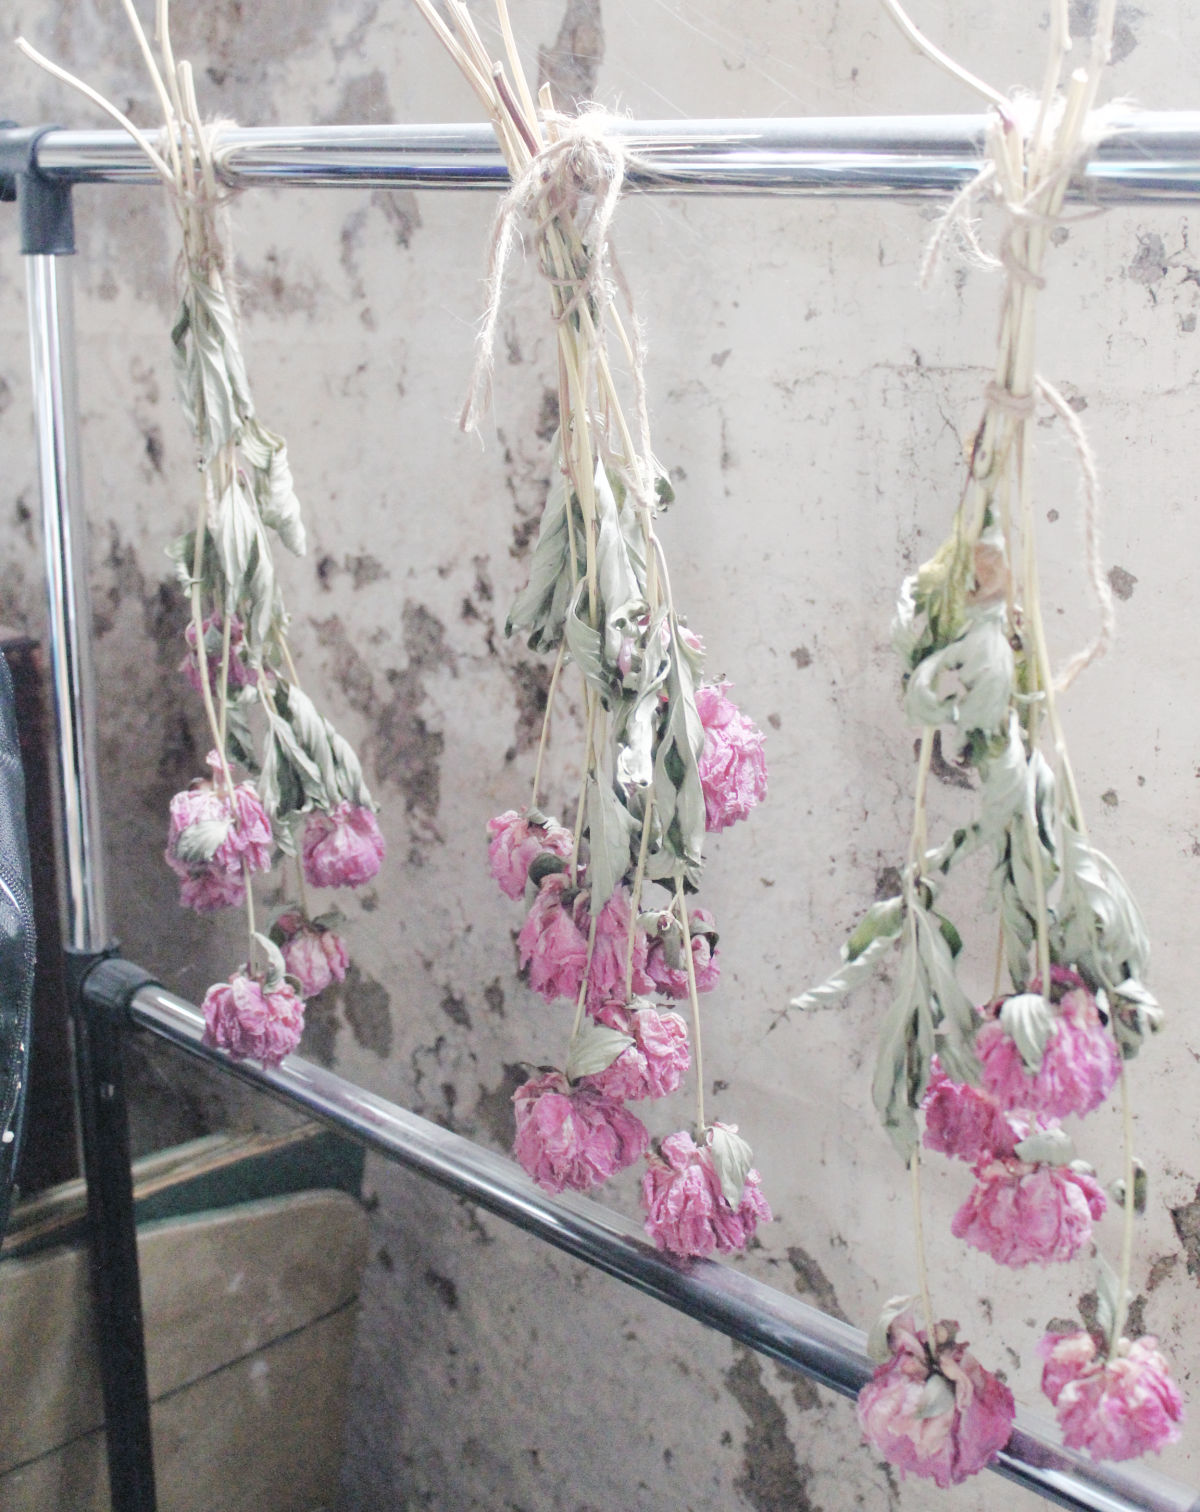 Three bouquets of peonies hanging upside down from a pole.